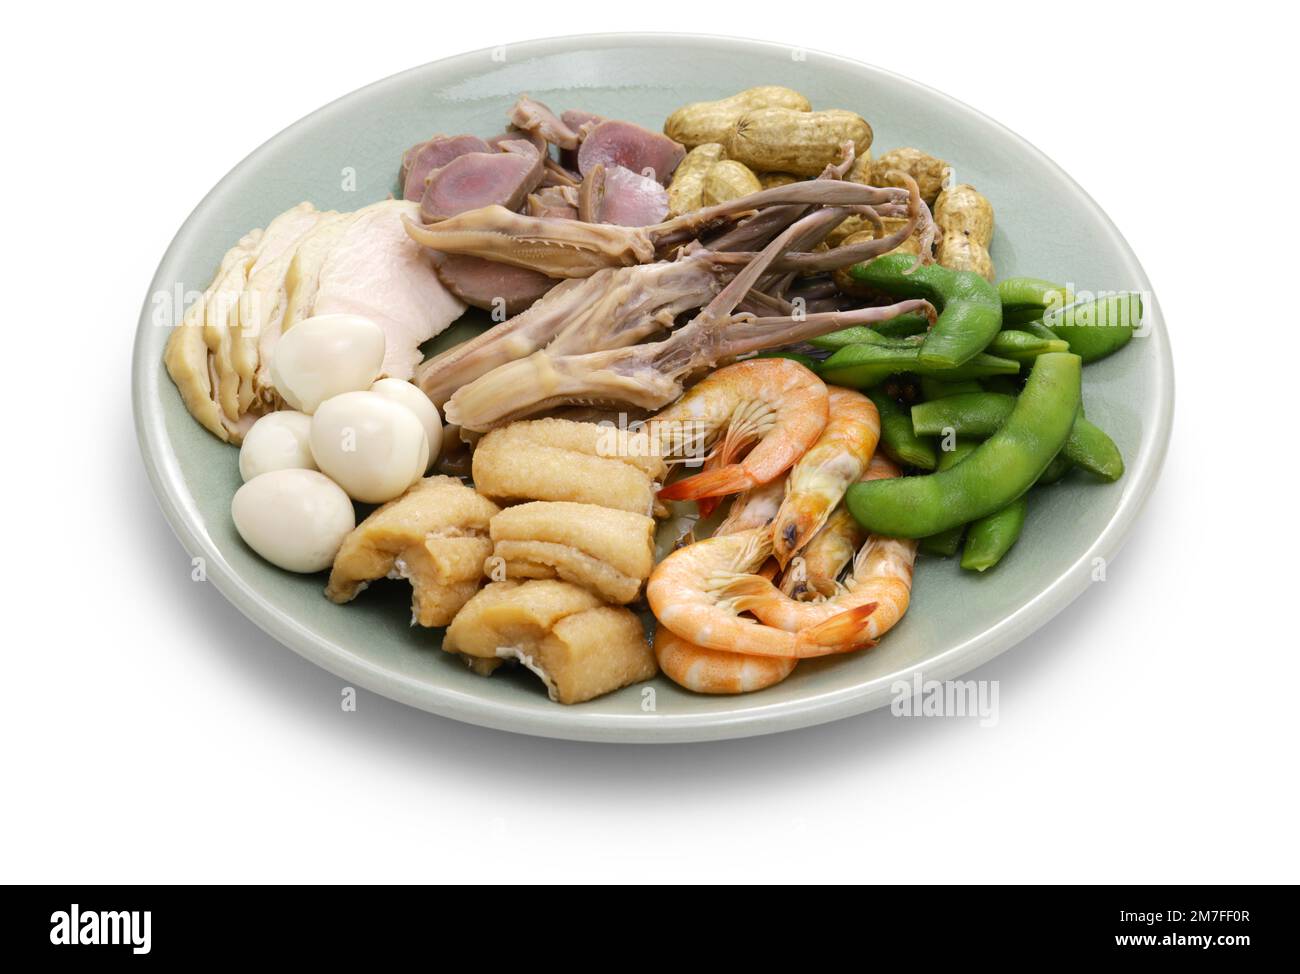 Traditional Shanghai summer cuisine. the meat and vegetables were soaked in aged Chinese wine lees brine. Stock Photo